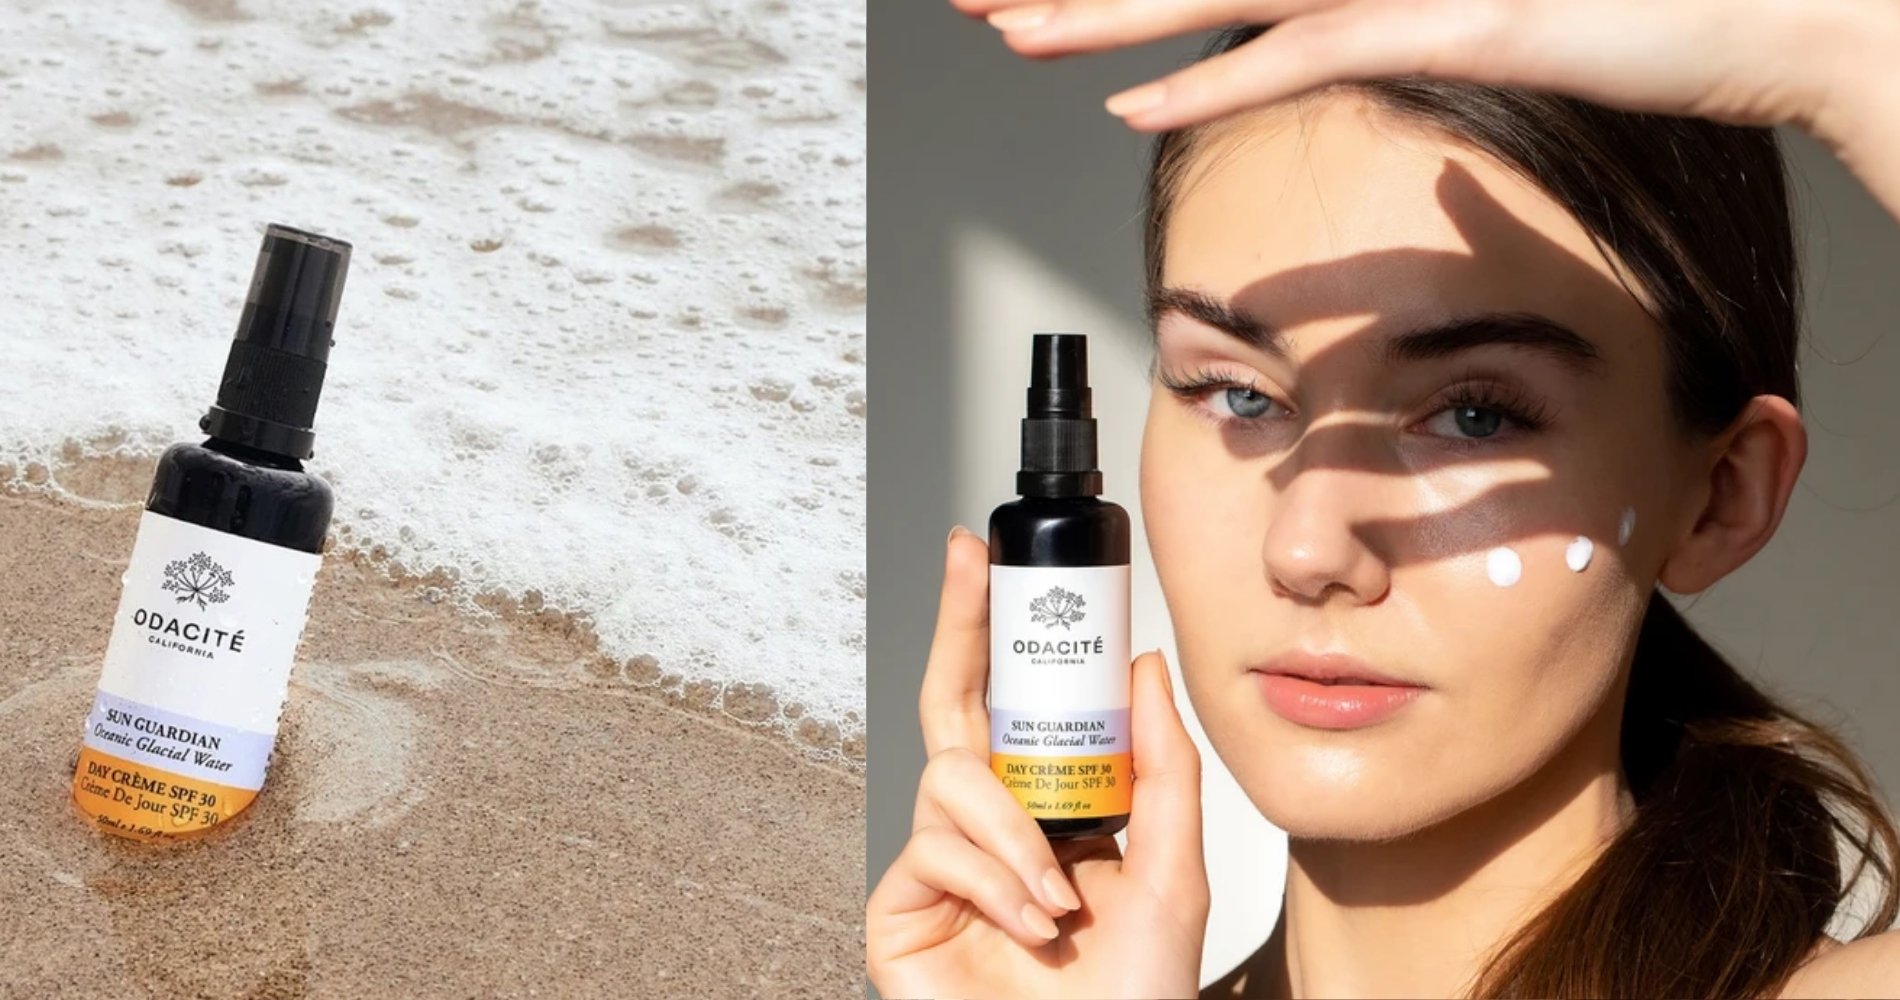 Introducing Sun Guardian Day Crème SPF 30: *Officially Certified By PROTECT LAND + SEA* - NaturelleShop.com